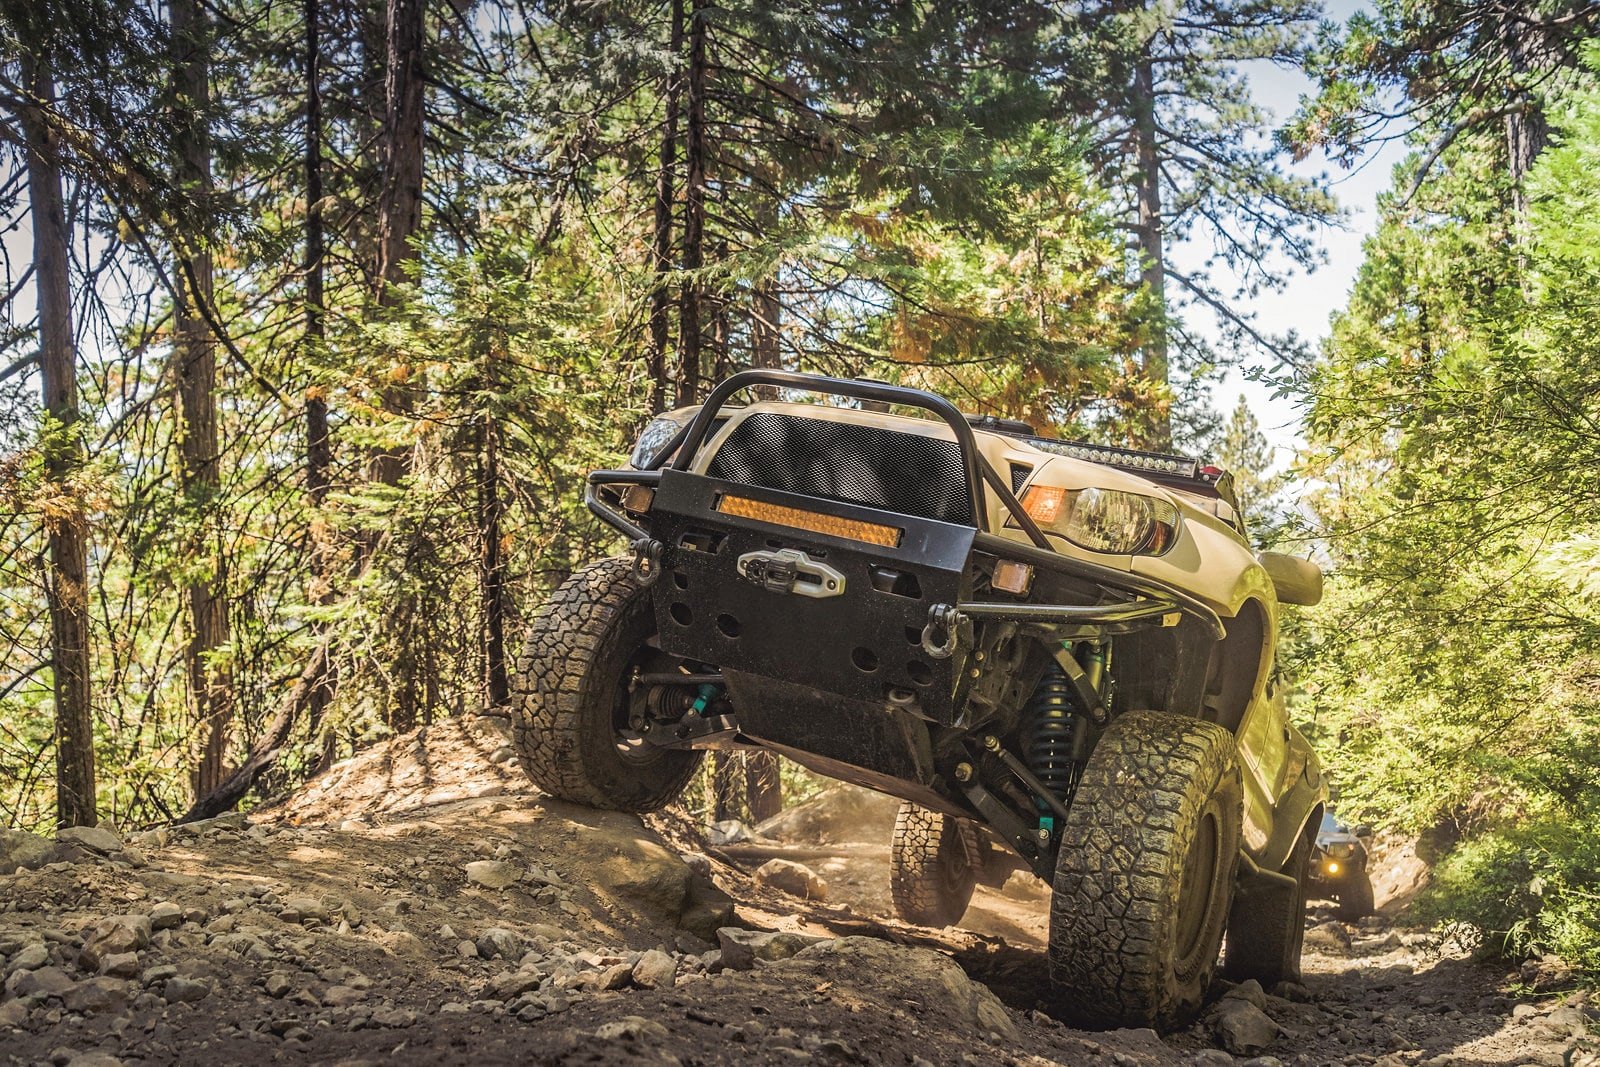 Toyota Tacoma wheeling on the trails - Photo by Grillcraft